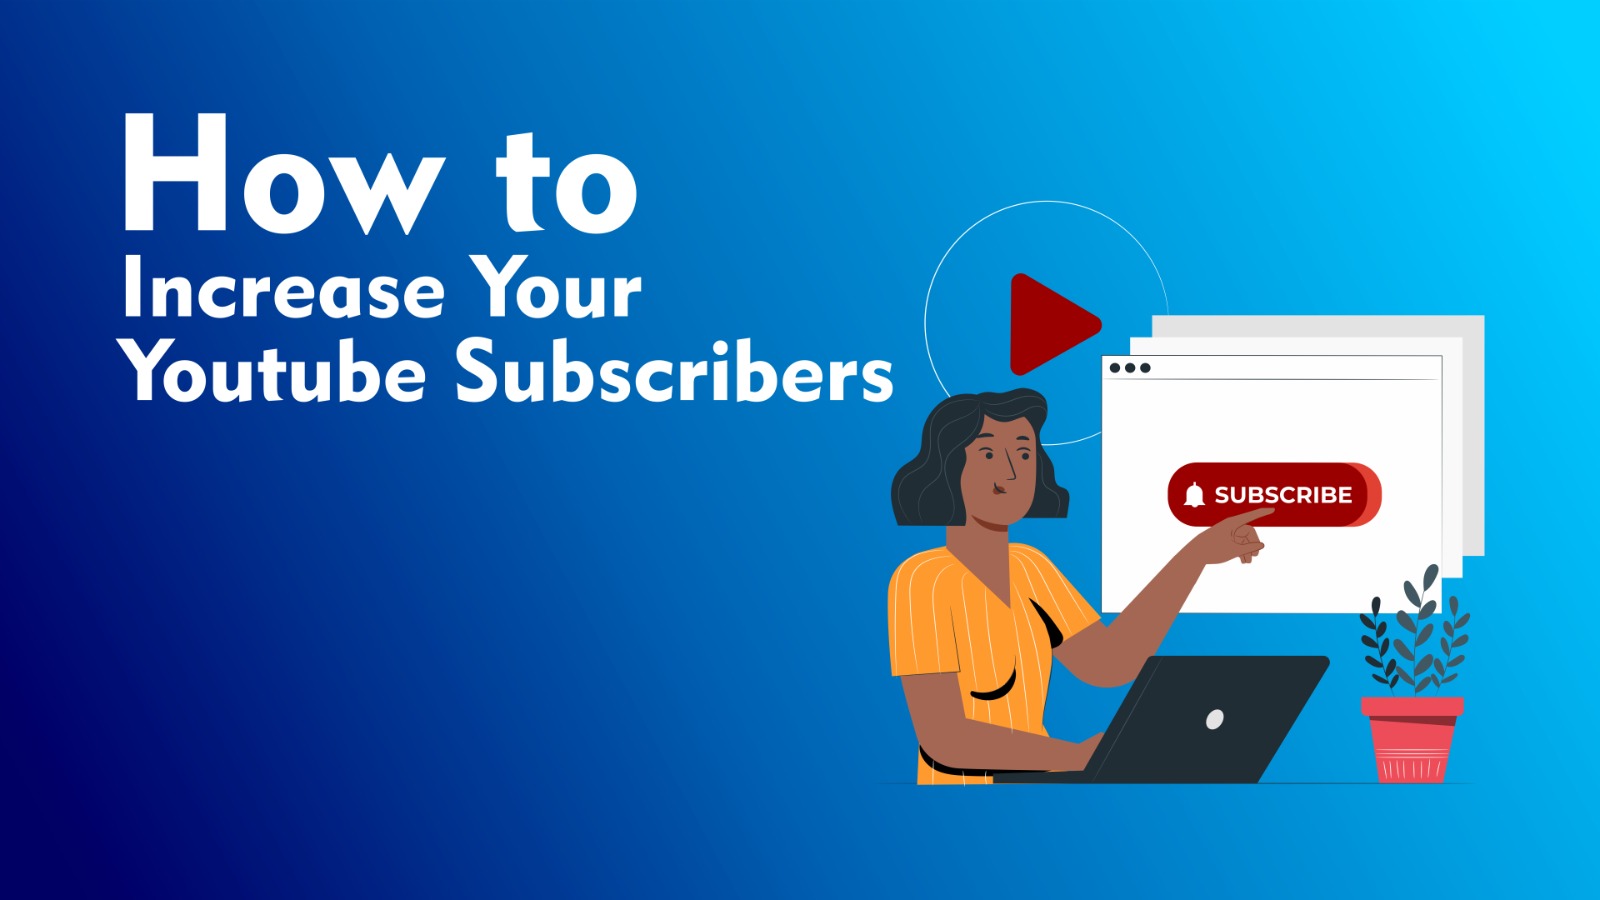 buy views for youtube, youtube video promotion service india, buy instagram likes india, buy real active youtube subscribers,, buy youtube subscribers USA, social media verification service india, Google Adwords Company in Noida, Buy real YouTube subscribers